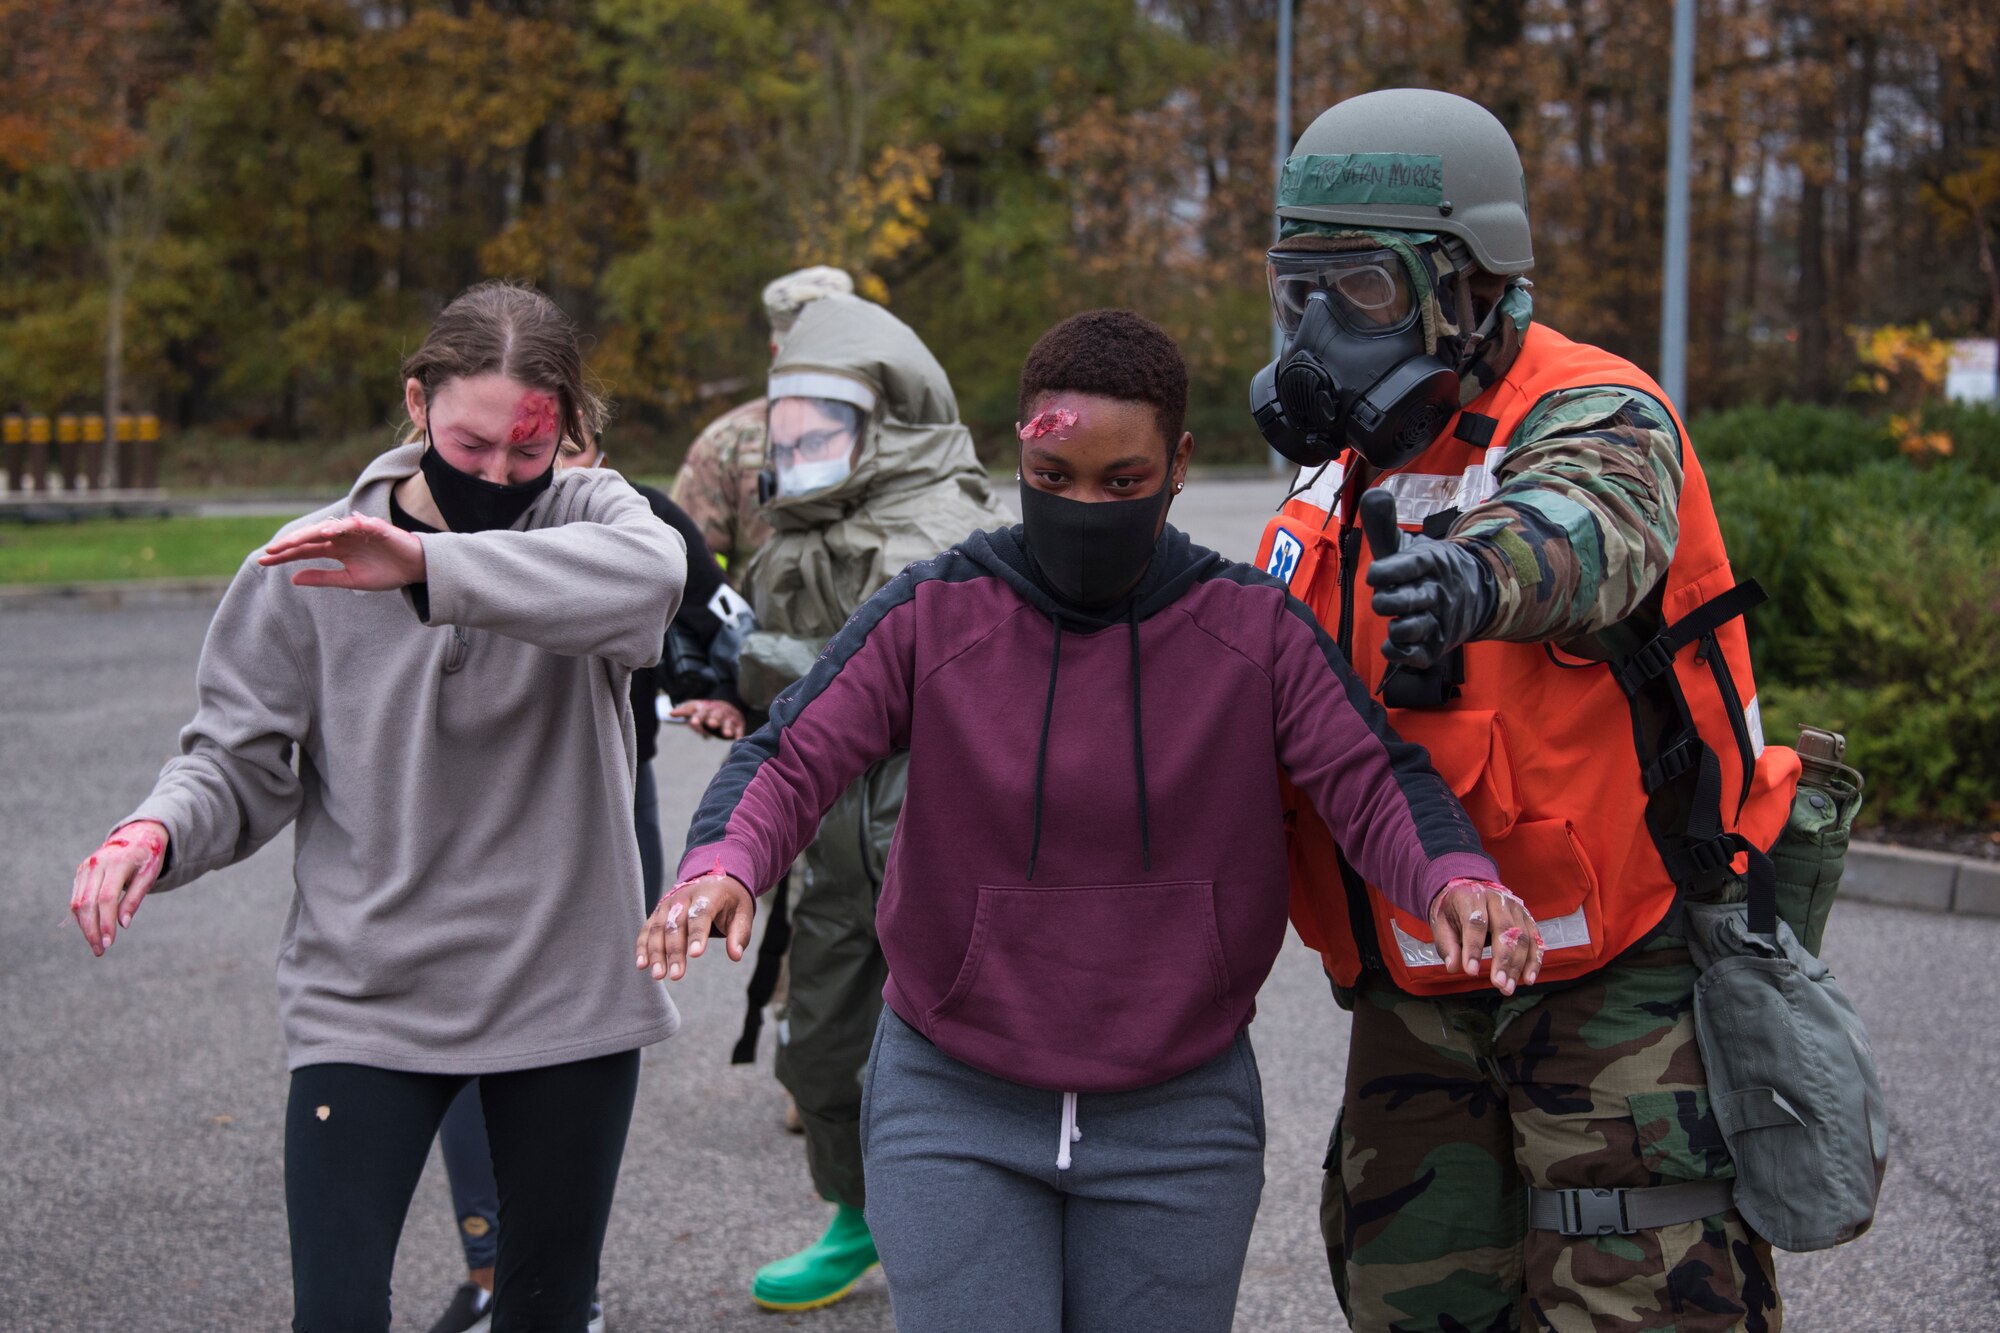 An Airman assisting with initial triage, right, directs mock victims to an in-place patient decontamination tent during an exercise at Spangdahlem Air Base, Germany, Nov. 17, 2020. Simulated victims with possible exposure to an airborne substance must go through the IPPD process before being allowed admittance to the hospital. (U.S. Air Force photo by Senior Airman Chance D. Nardone)